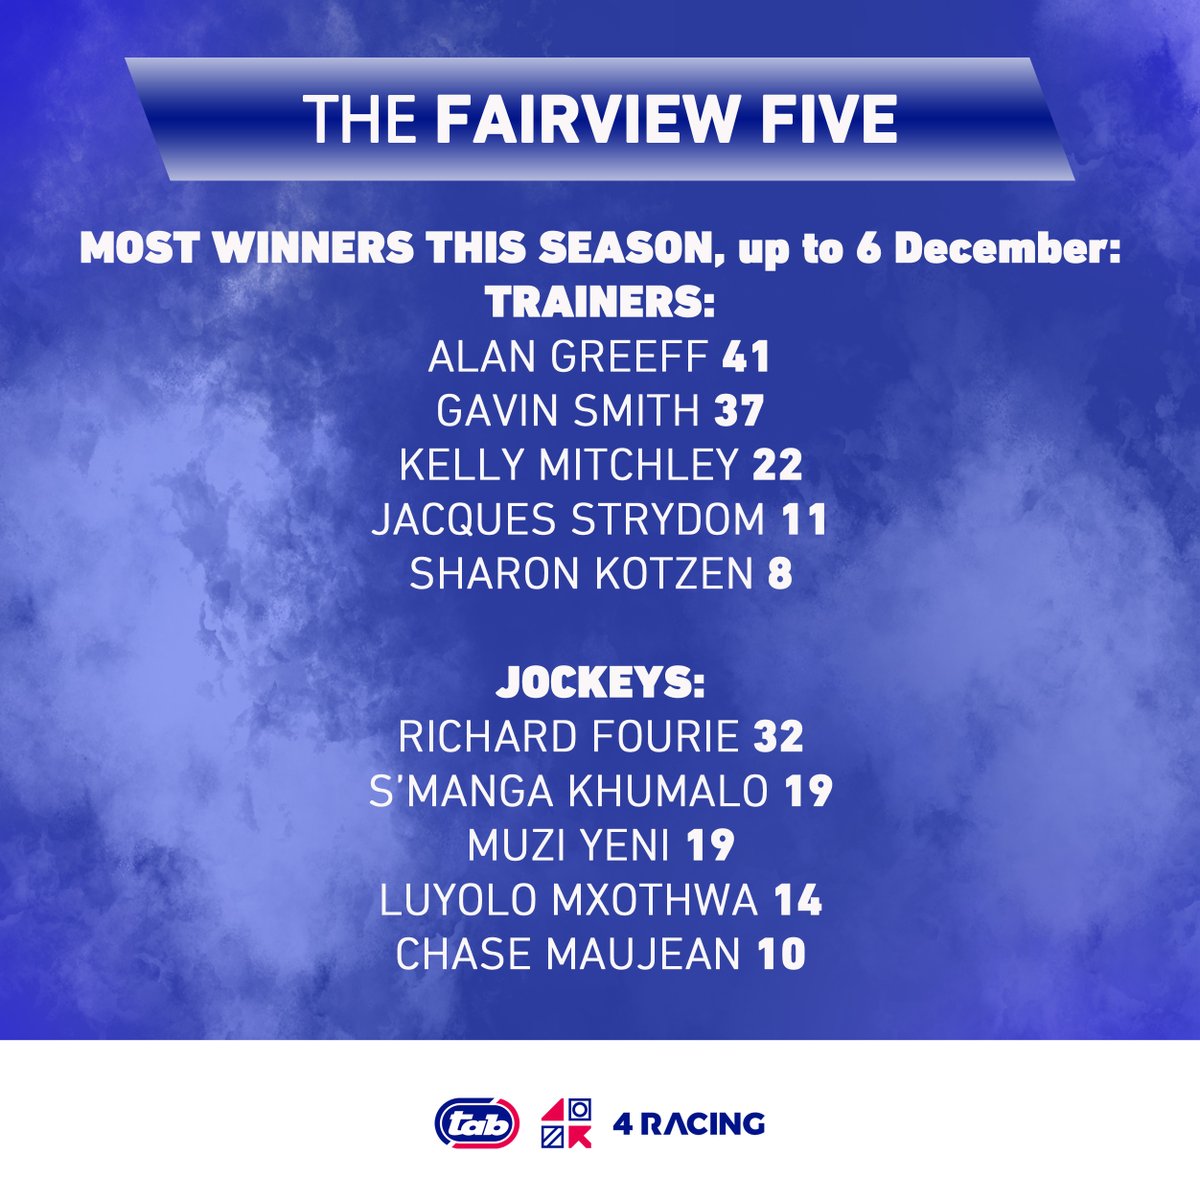 Just checking in with some monthly Fairview numbers!

#thisisracing #tab #4racing #winning #betting #tips #attheraces #horseracing #passion #jockey #jockeylife #racehorsetrainer #training #racingsa